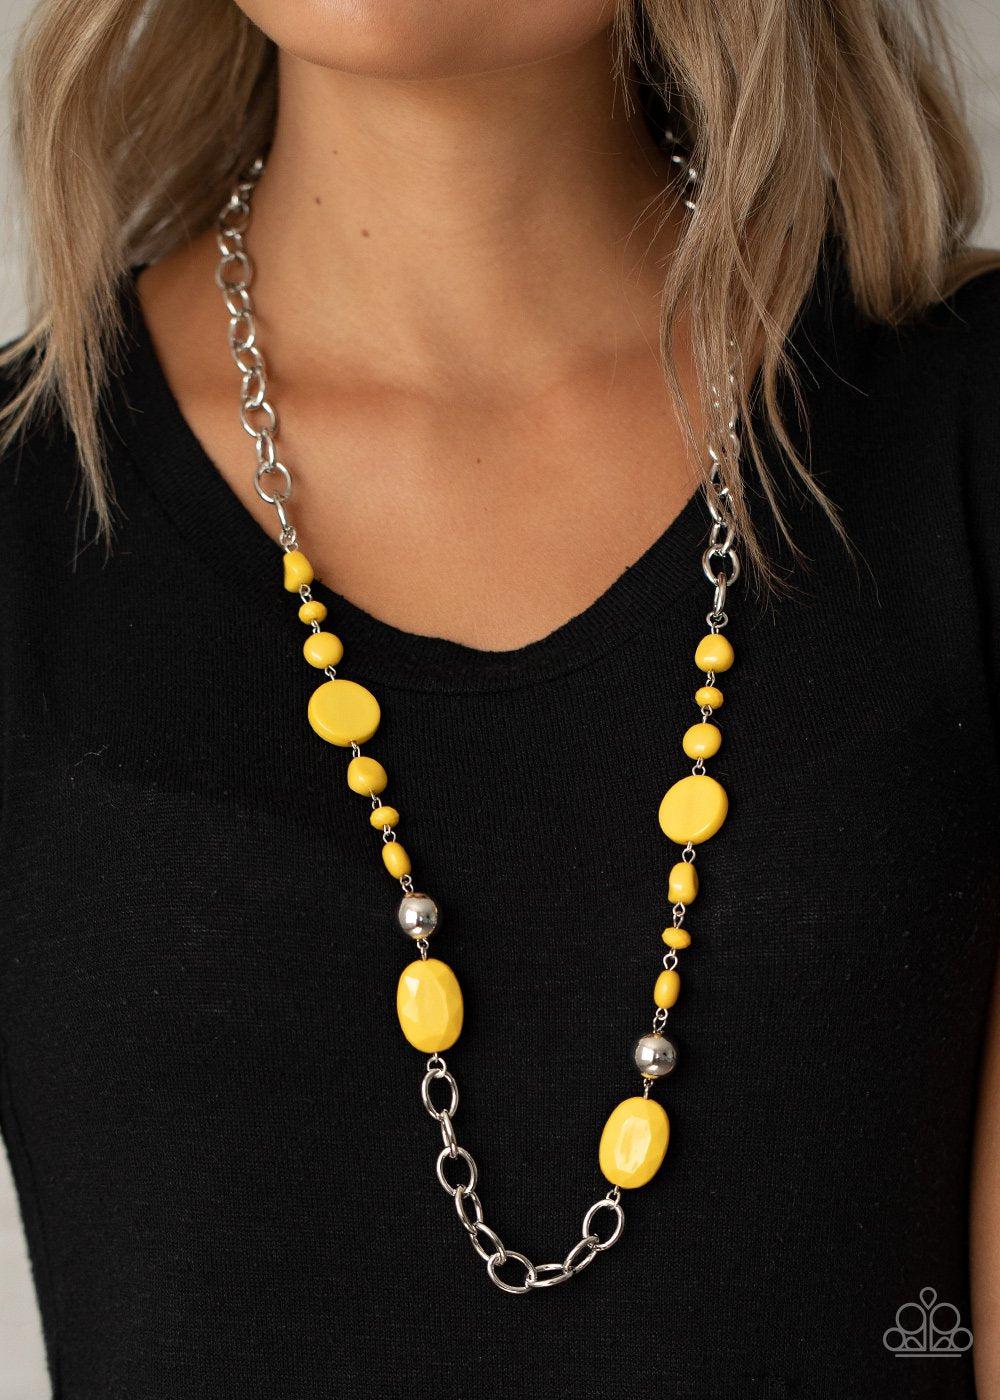 When I GLOW Up Yellow Necklace - Paparazzi Accessories-CarasShop.com - $5 Jewelry by Cara Jewels